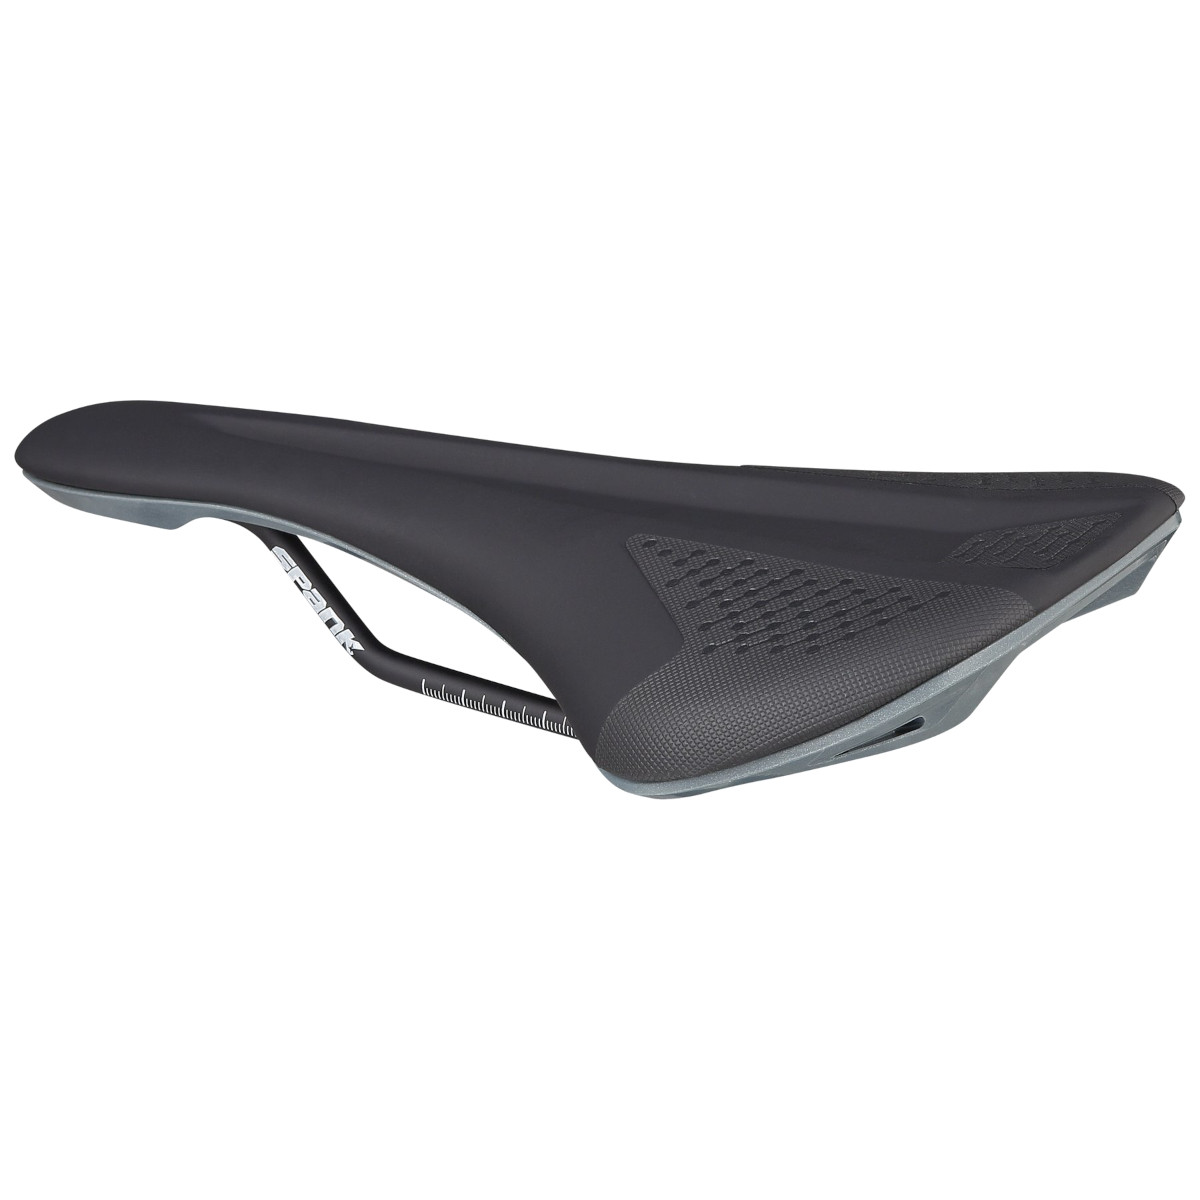 Picture of Spank Spike 160 Saddle - black/grey